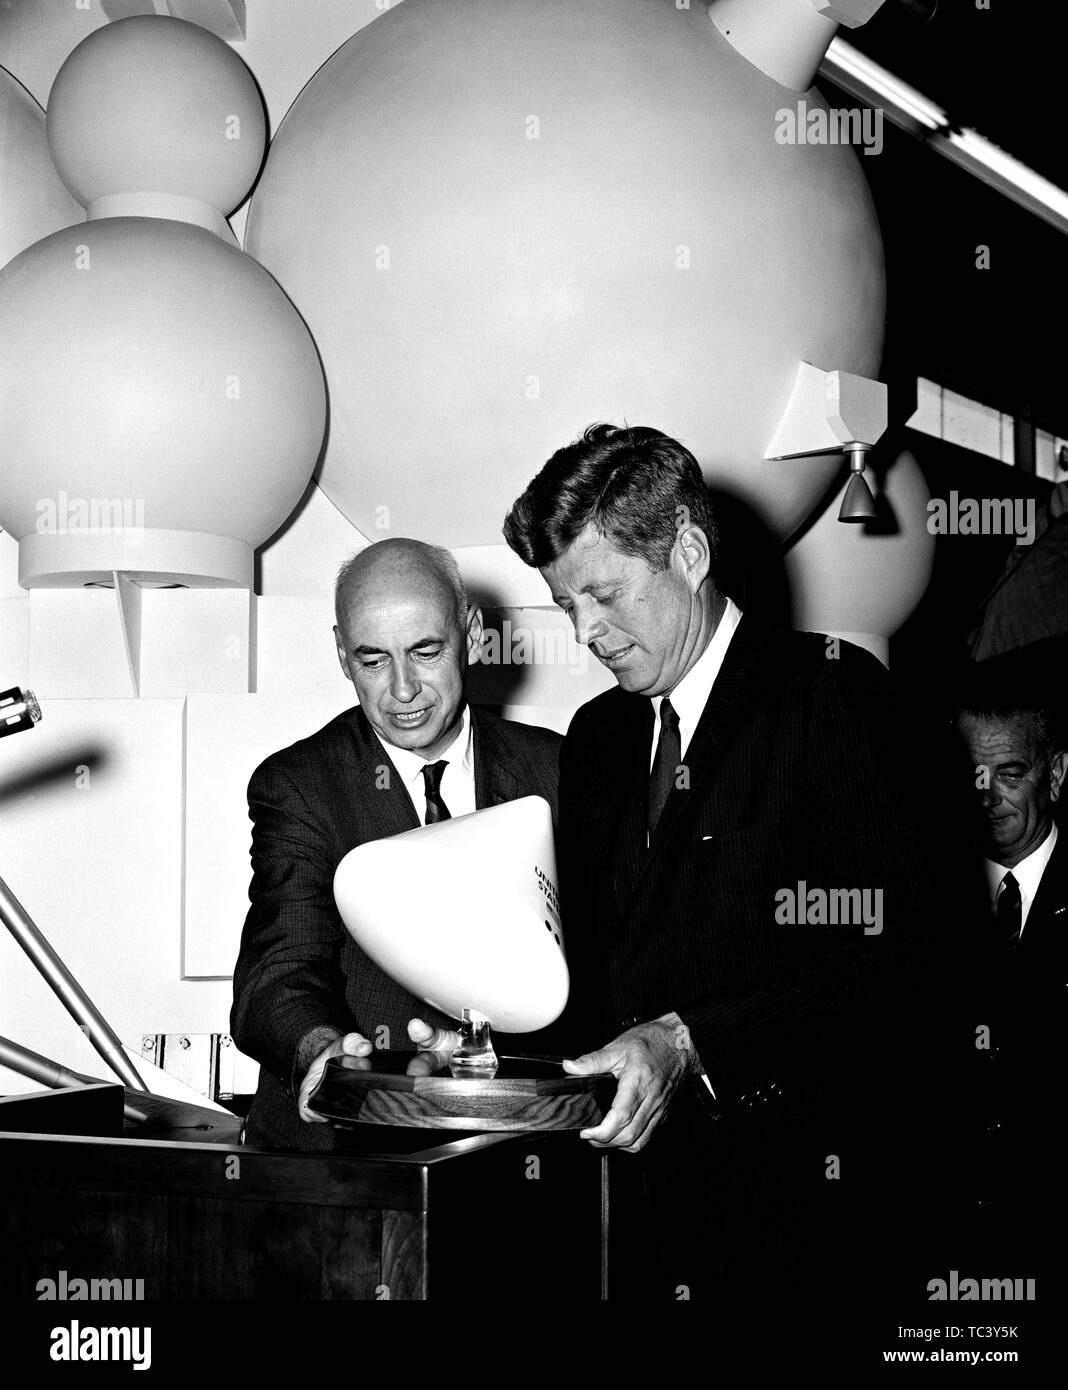 President John F Kennedy (1917 - 1963) and Dr Robert R Gilruth (1913 - 2000) look at a small model of the Apollo Command Module, September 12, 1962. Image courtesy National Aeronautics and Space Administration (NASA). () Stock Photo